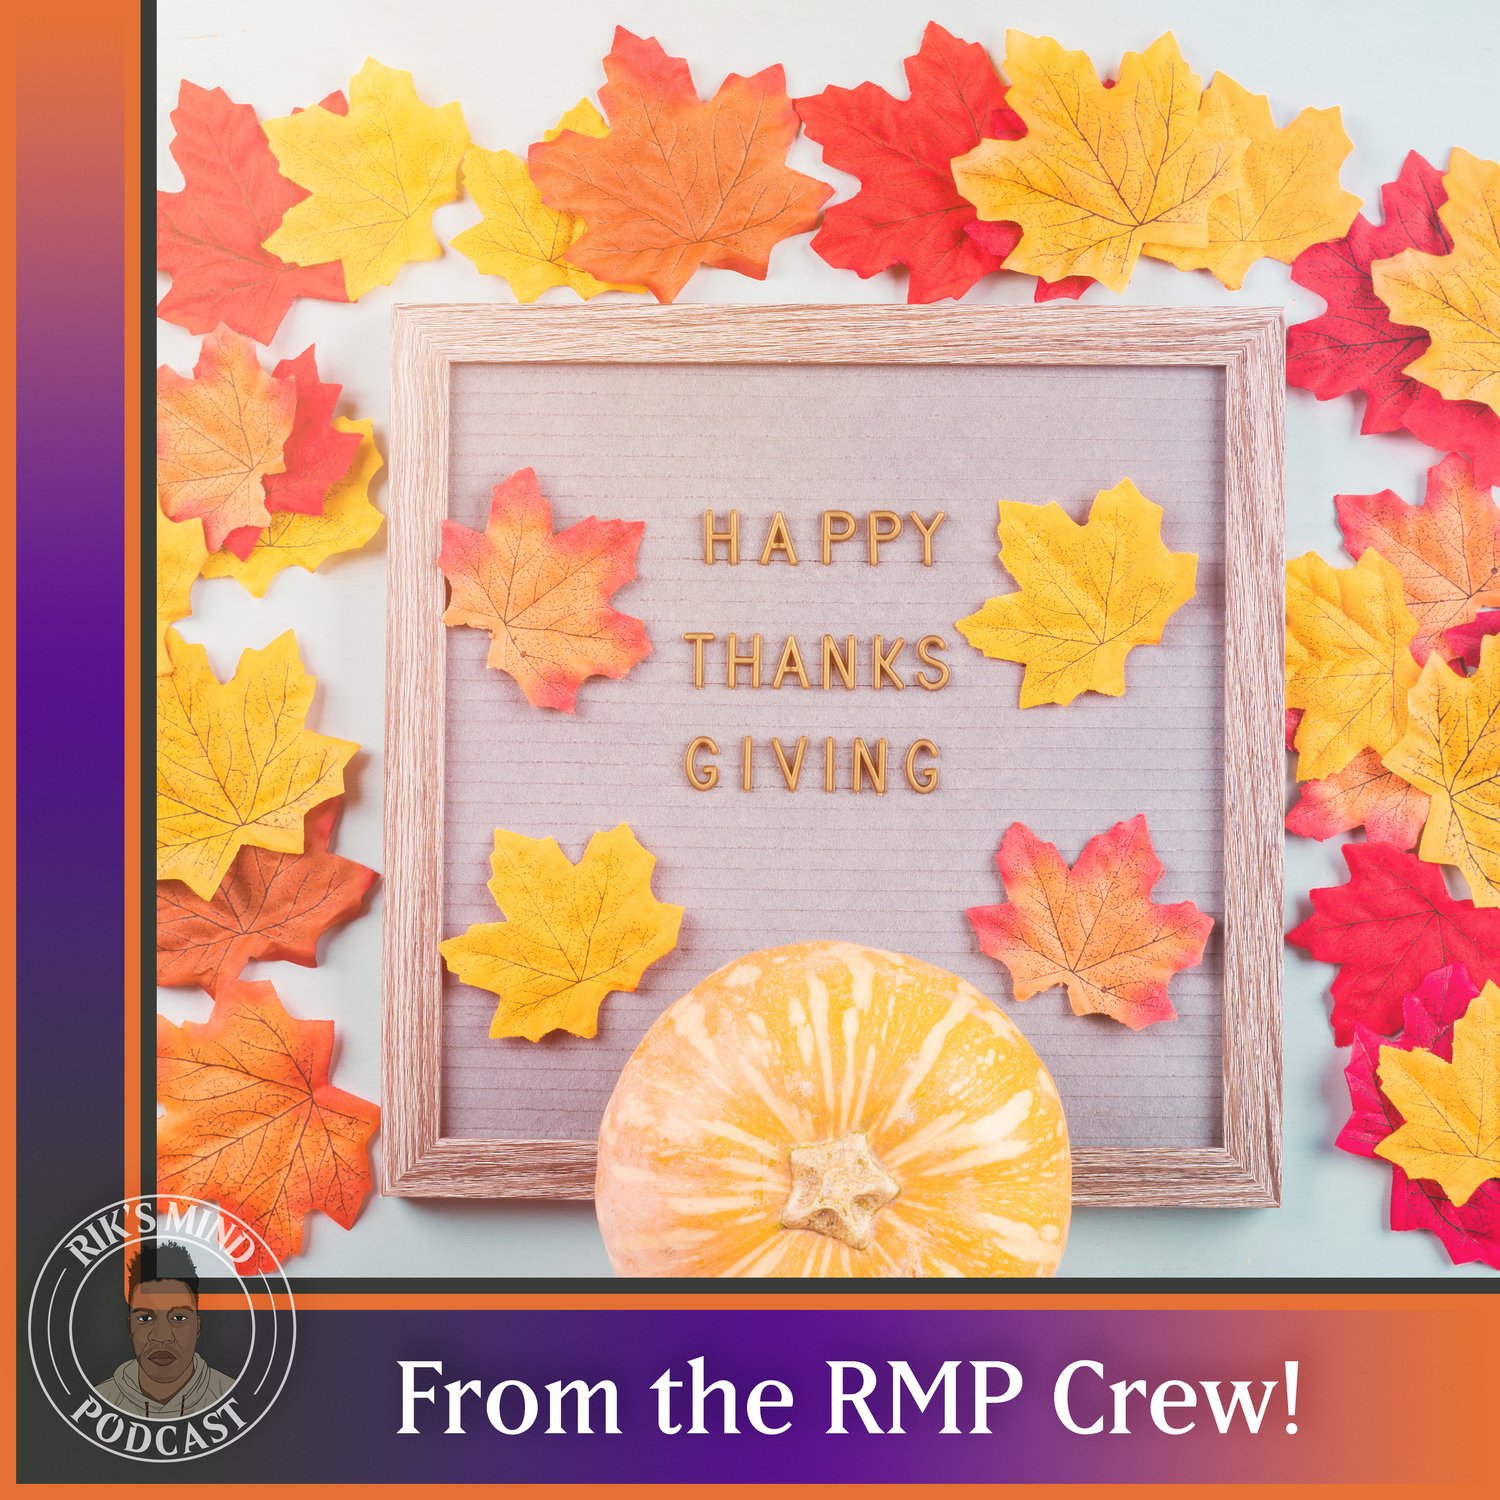 Happy Thanksgiving from the RMP Crew!